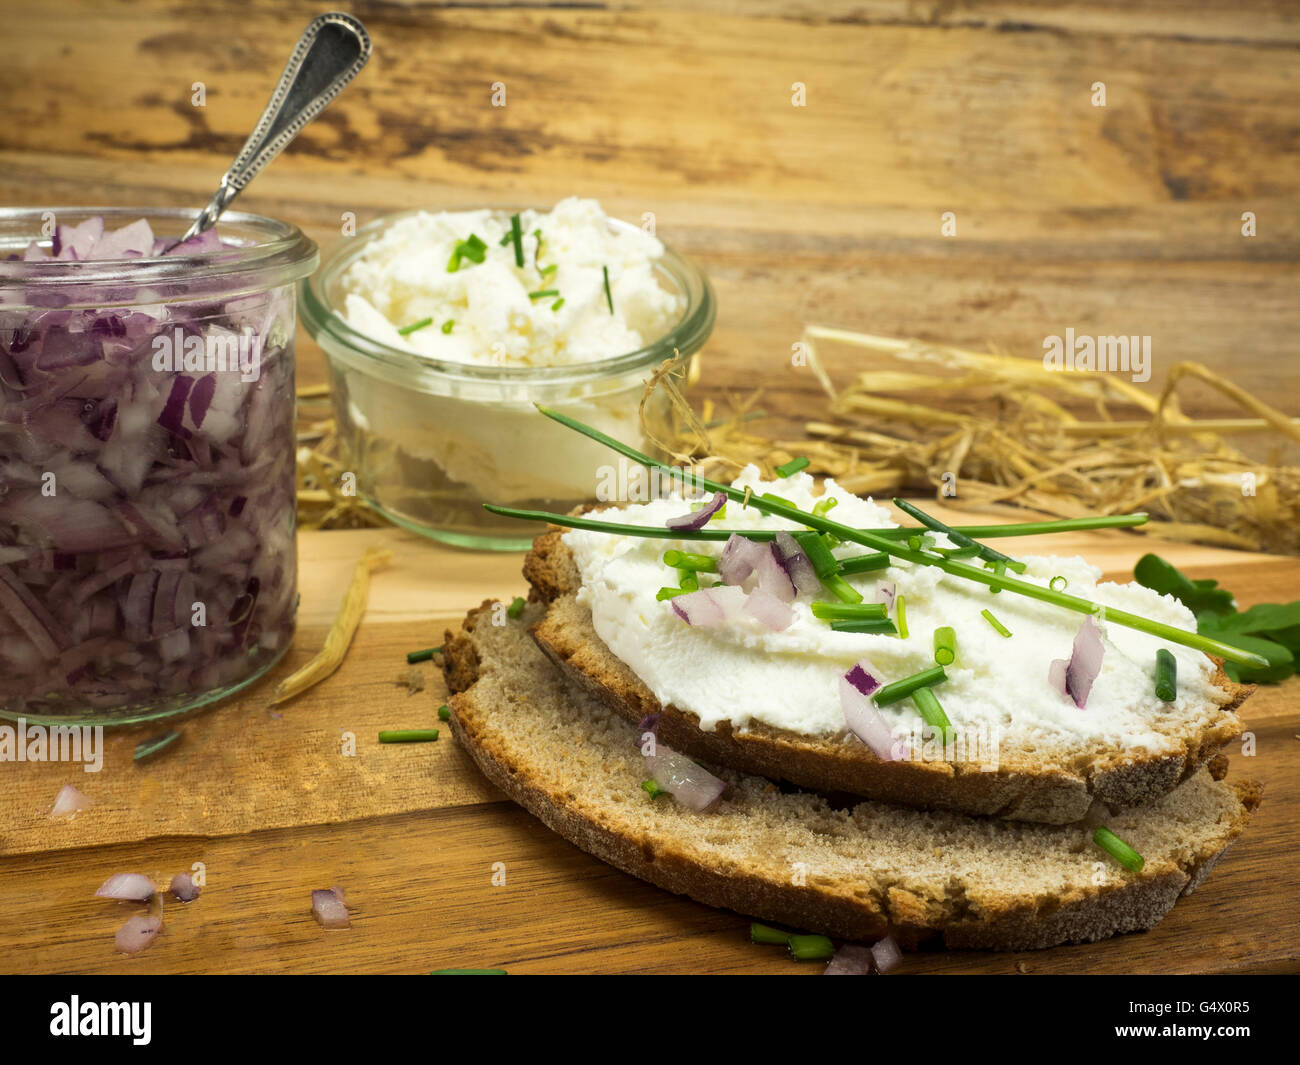 Fresh goat cheese with herbs and onions Stock Photo